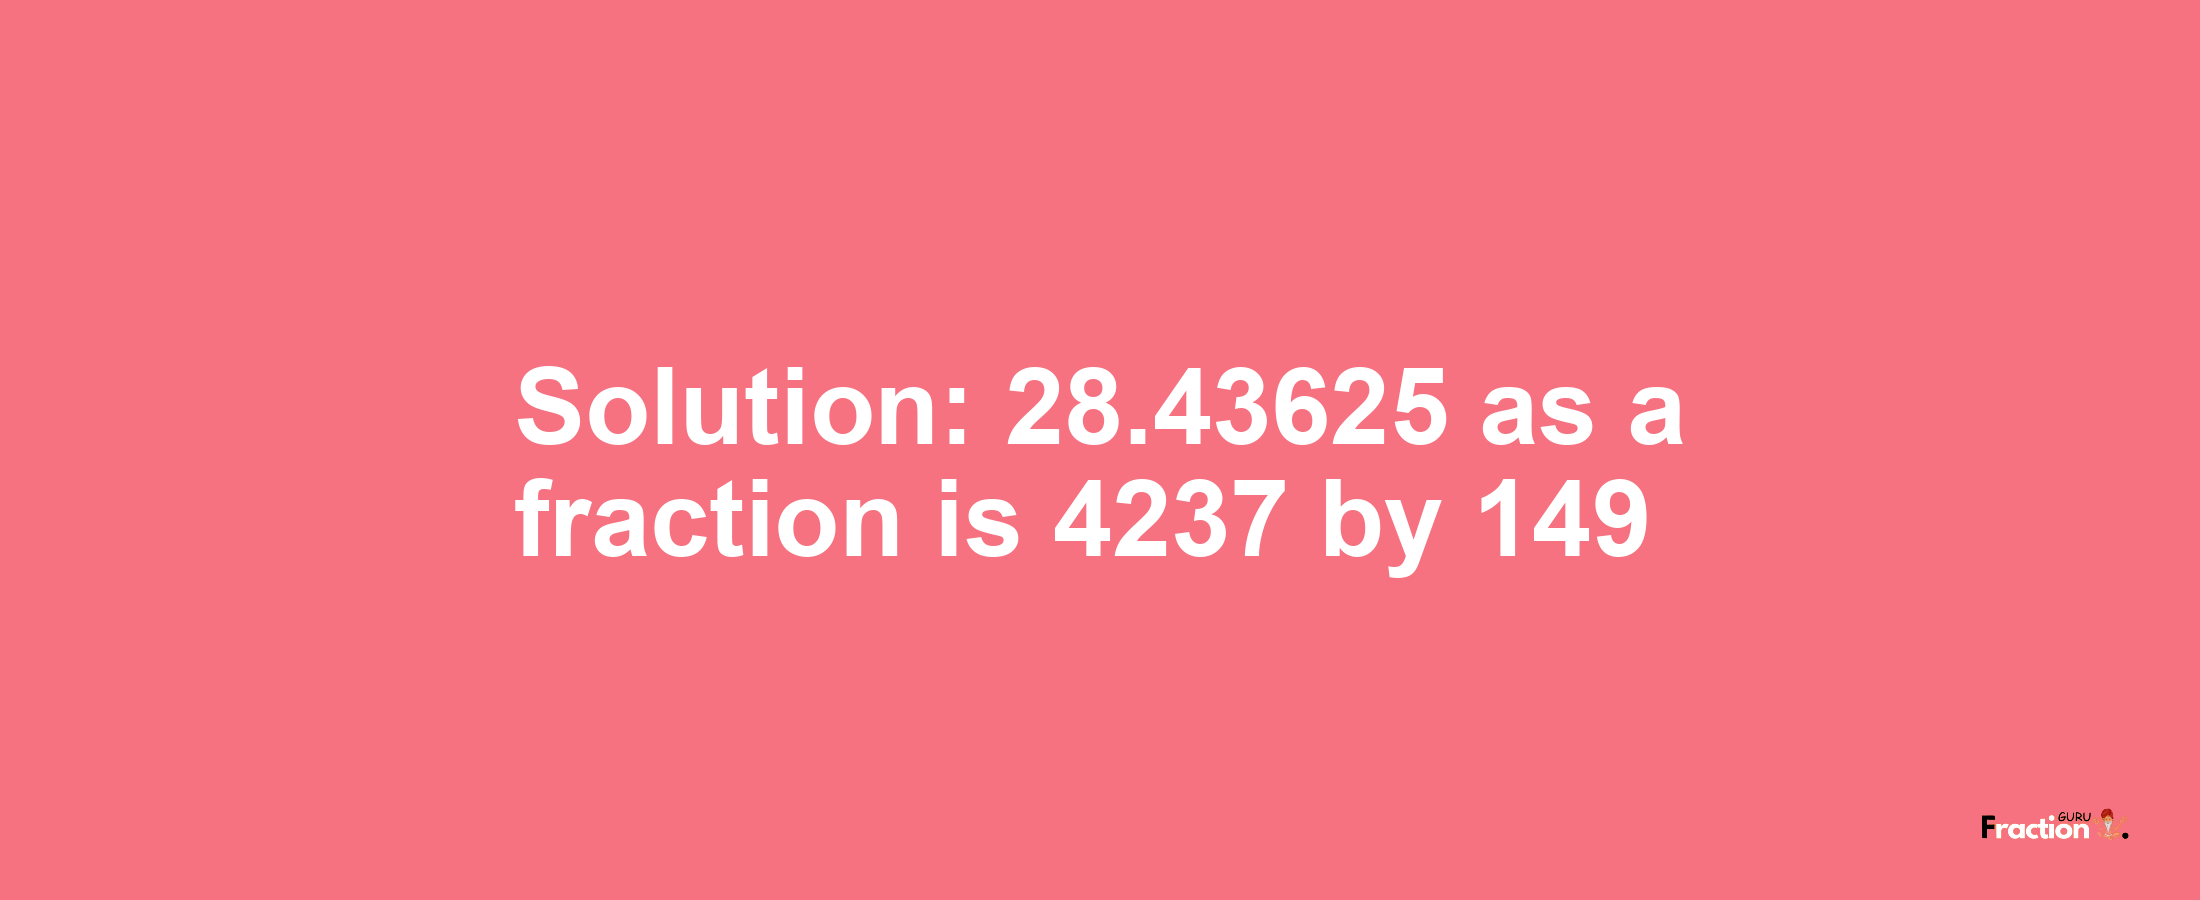 Solution:28.43625 as a fraction is 4237/149